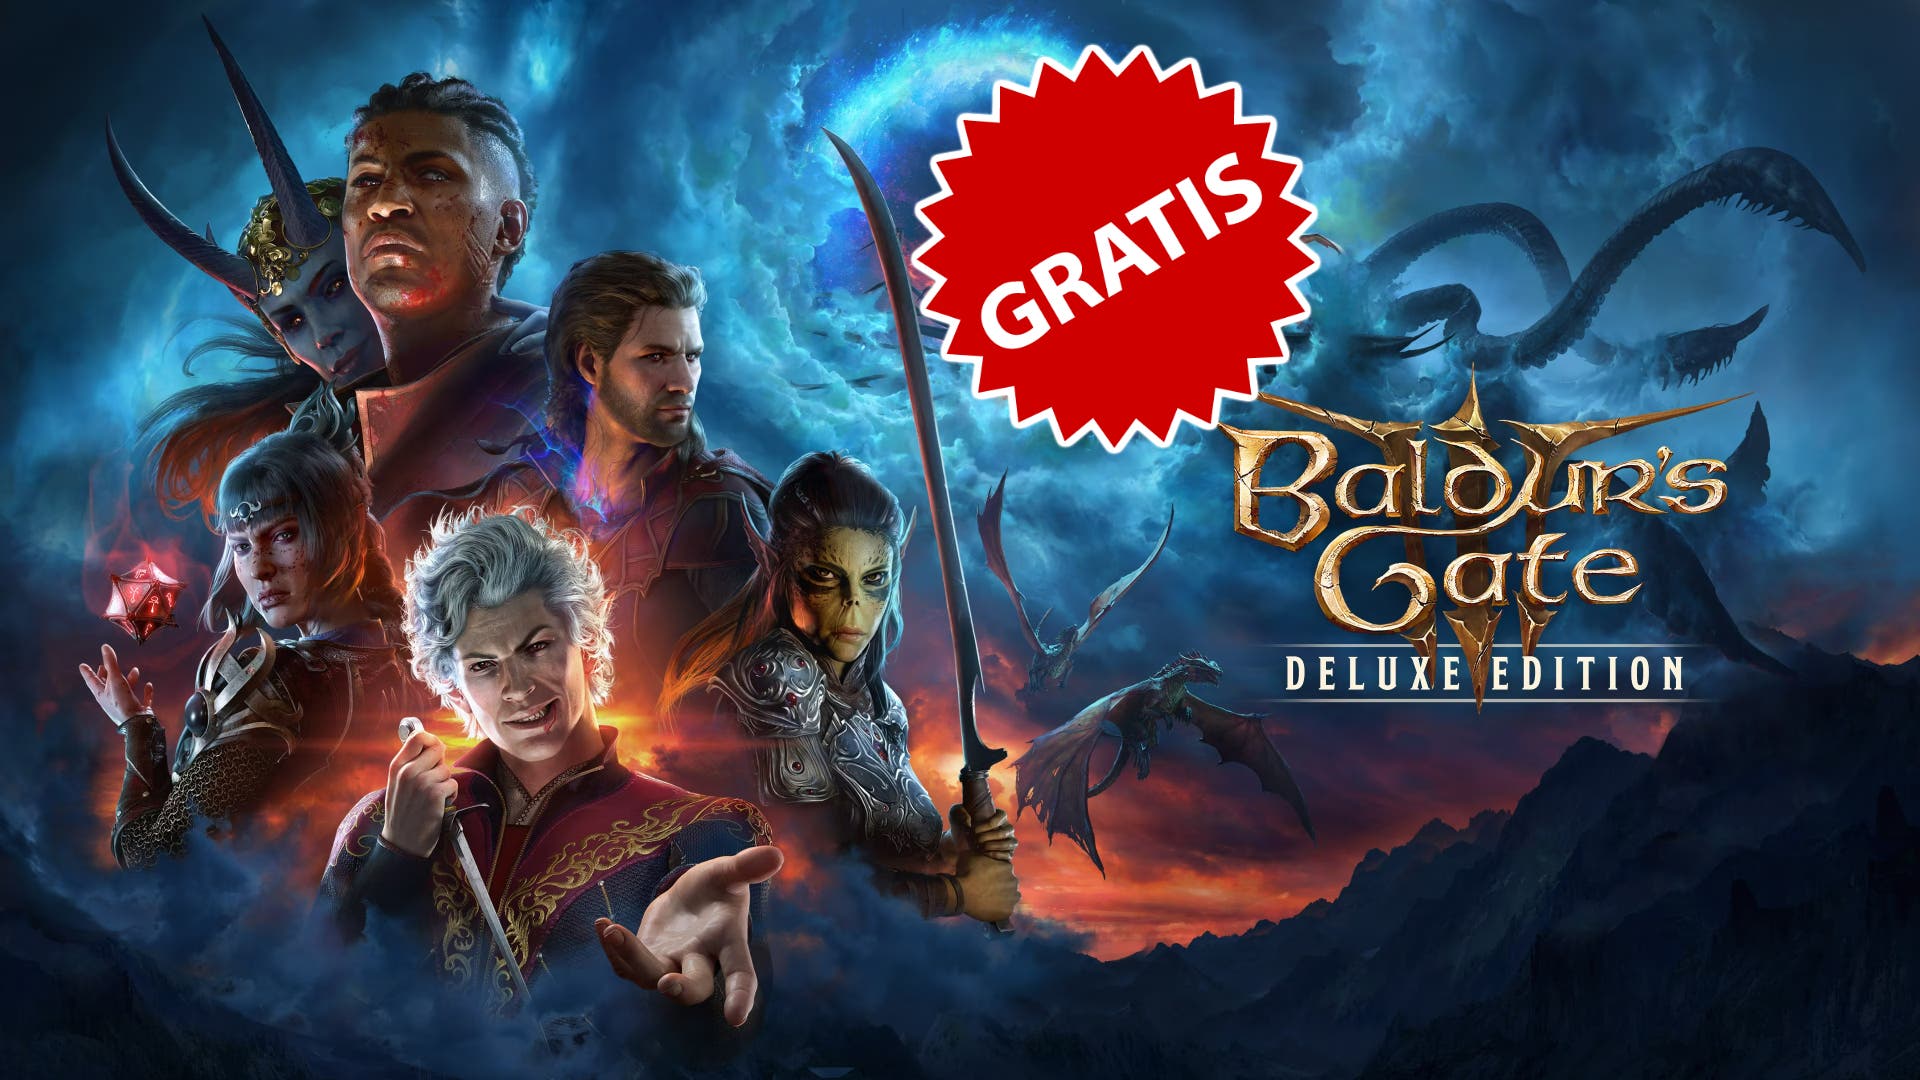 Baldur’s Gate 3: Users who meet this requirement will be able to get the Deluxe Edition for free